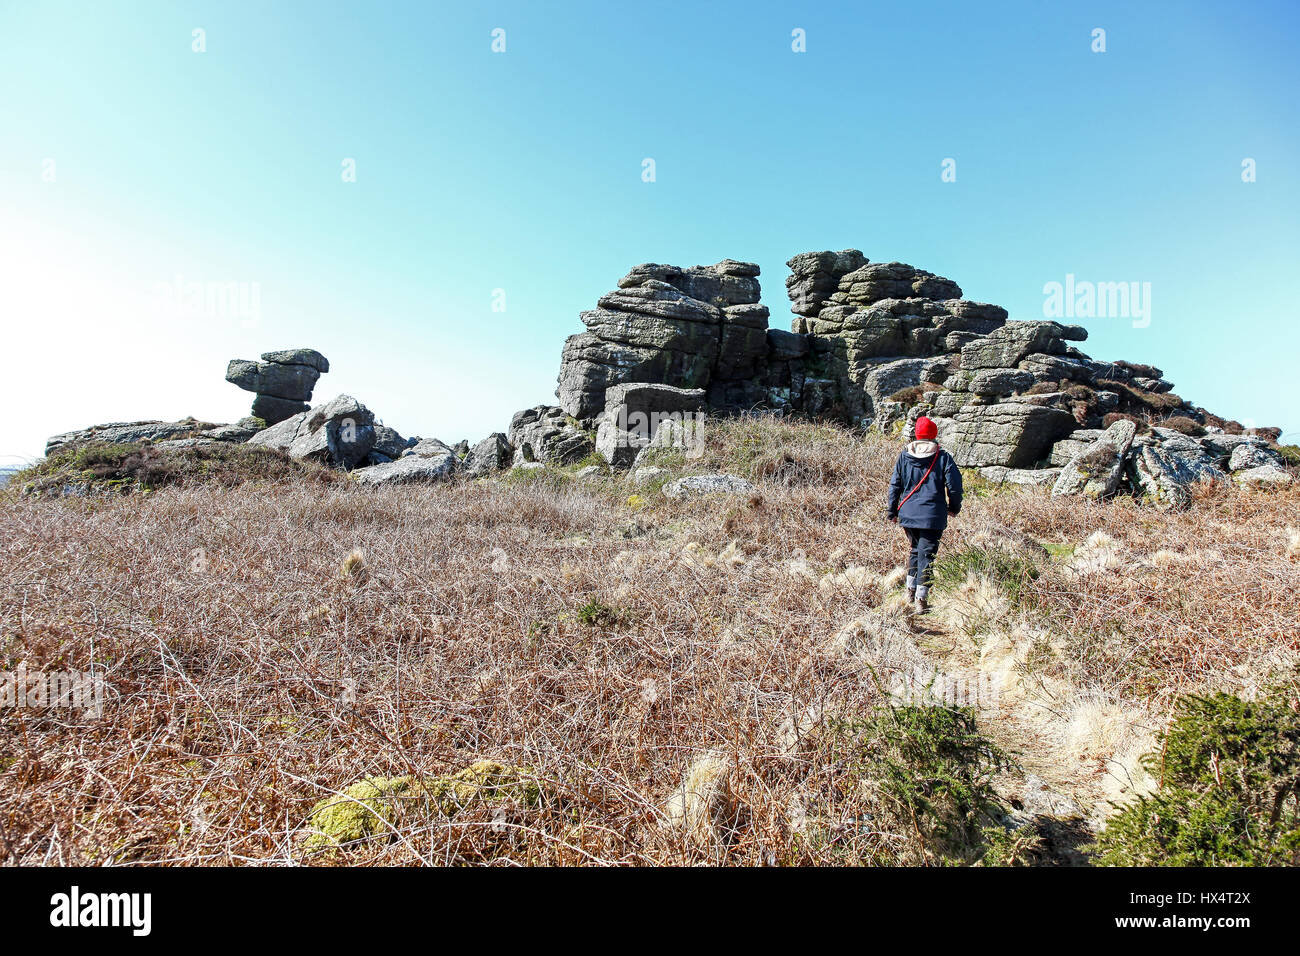 Carn Kenidjack is a hill covered in megaliths at Tregeseal, Cornwall. England, UK Stock Photo